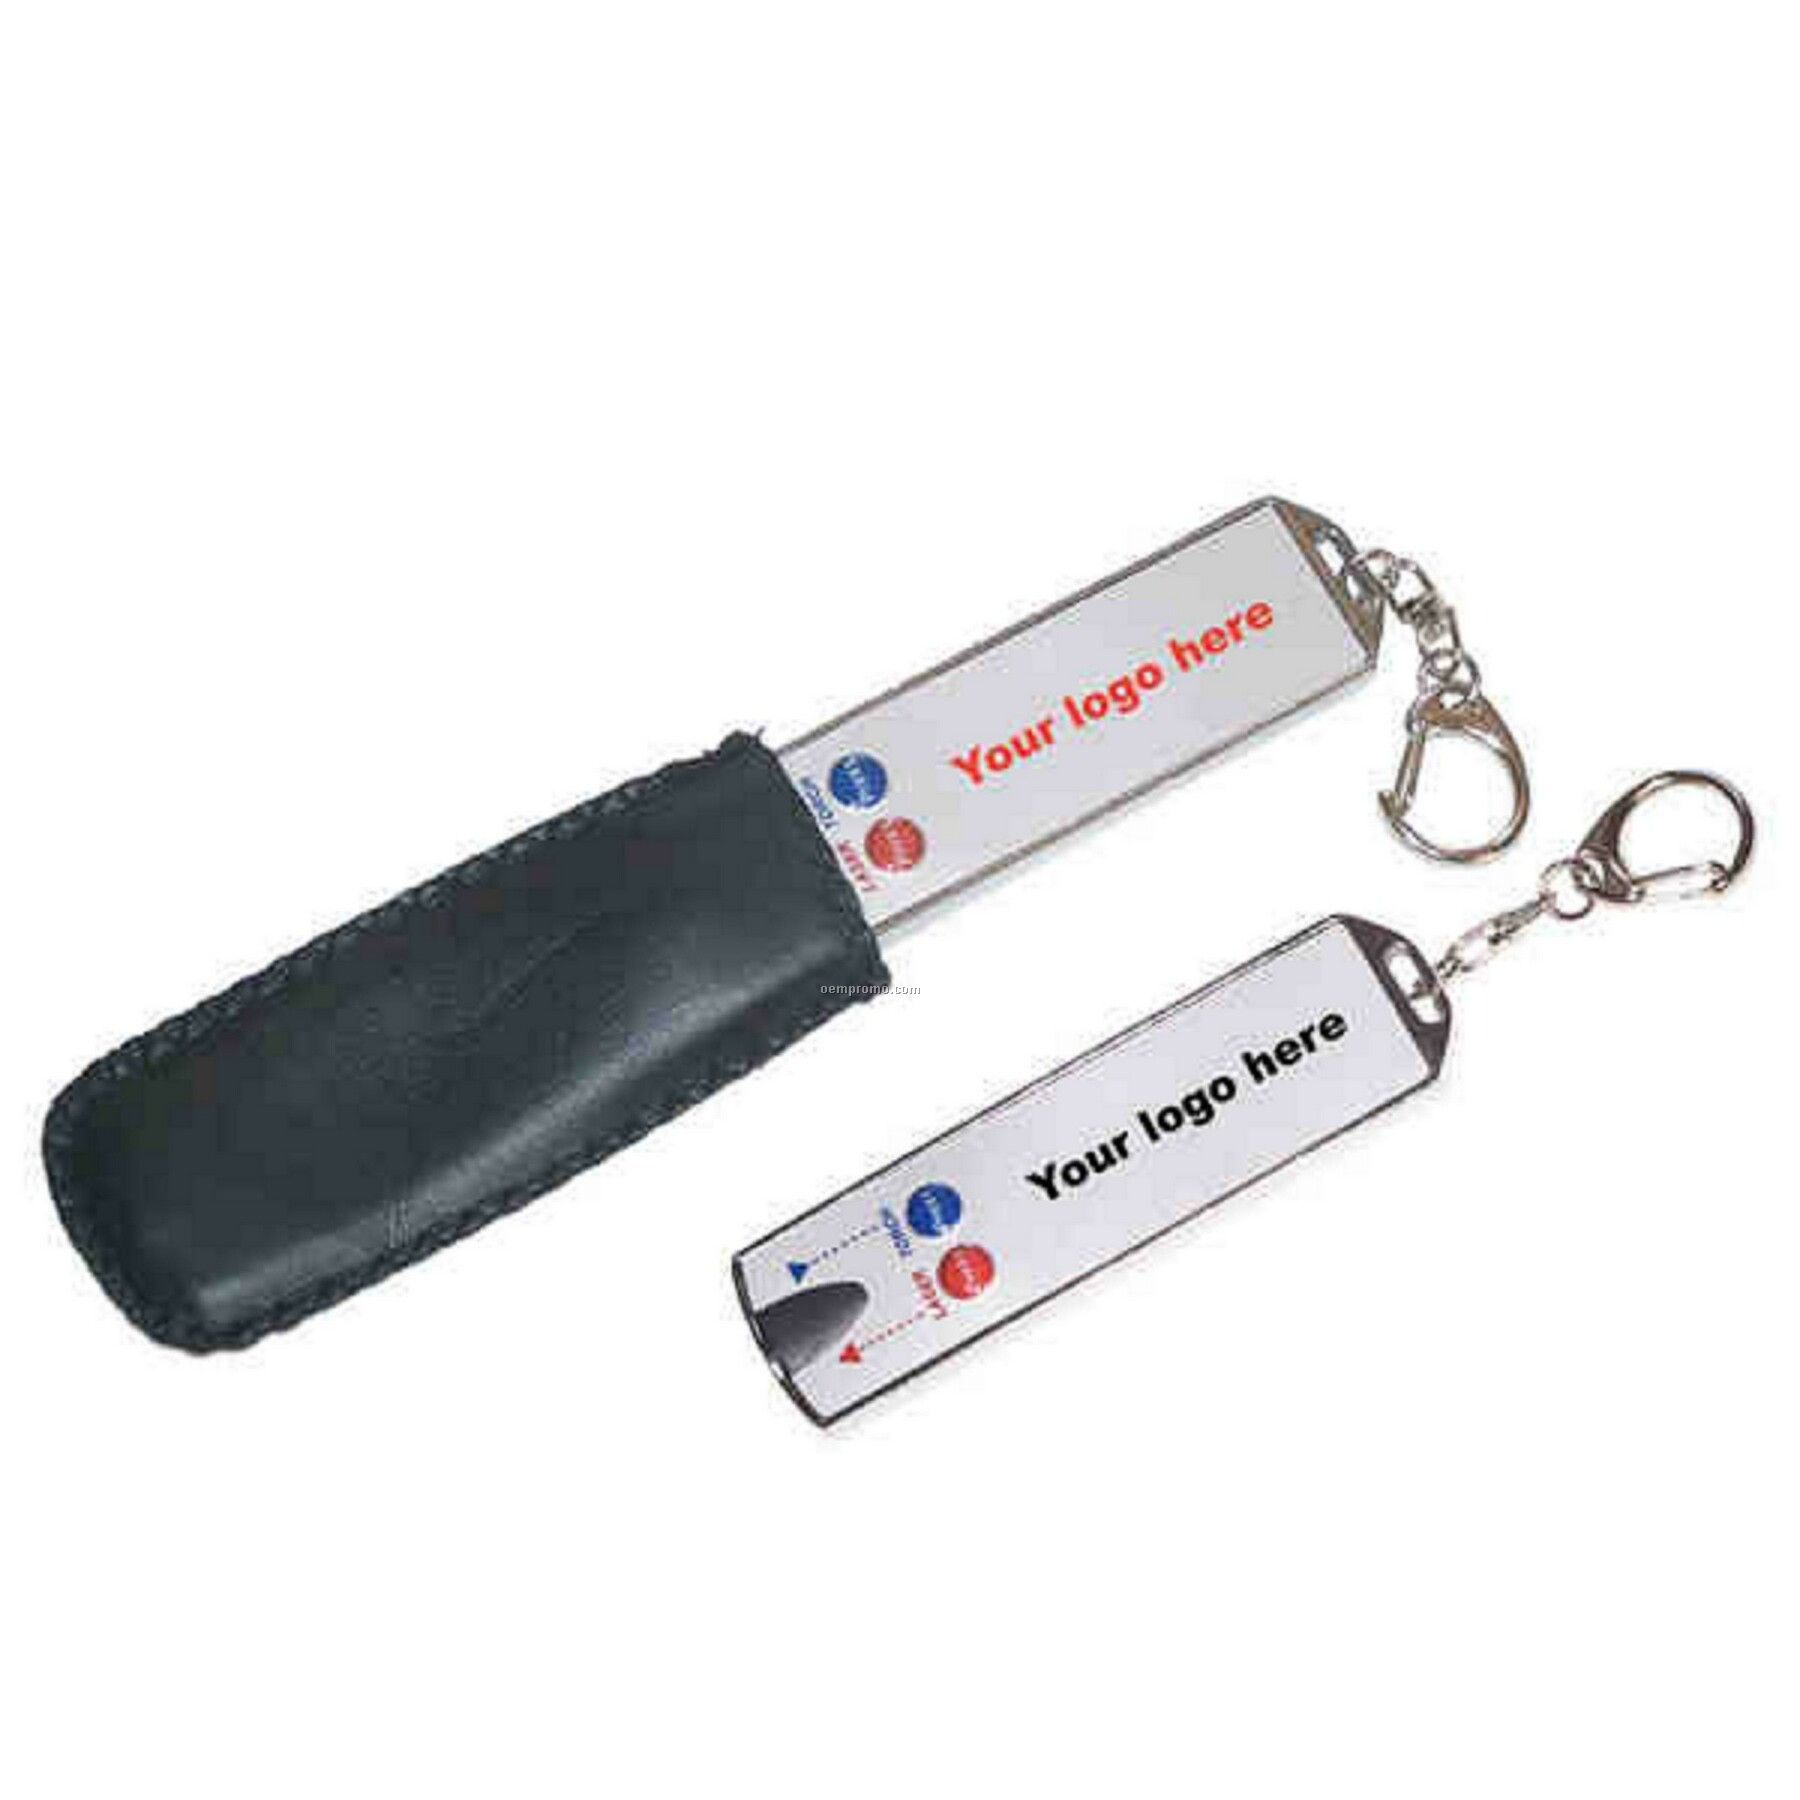 Compact Key Holder With Flashlight & Laser Pointer